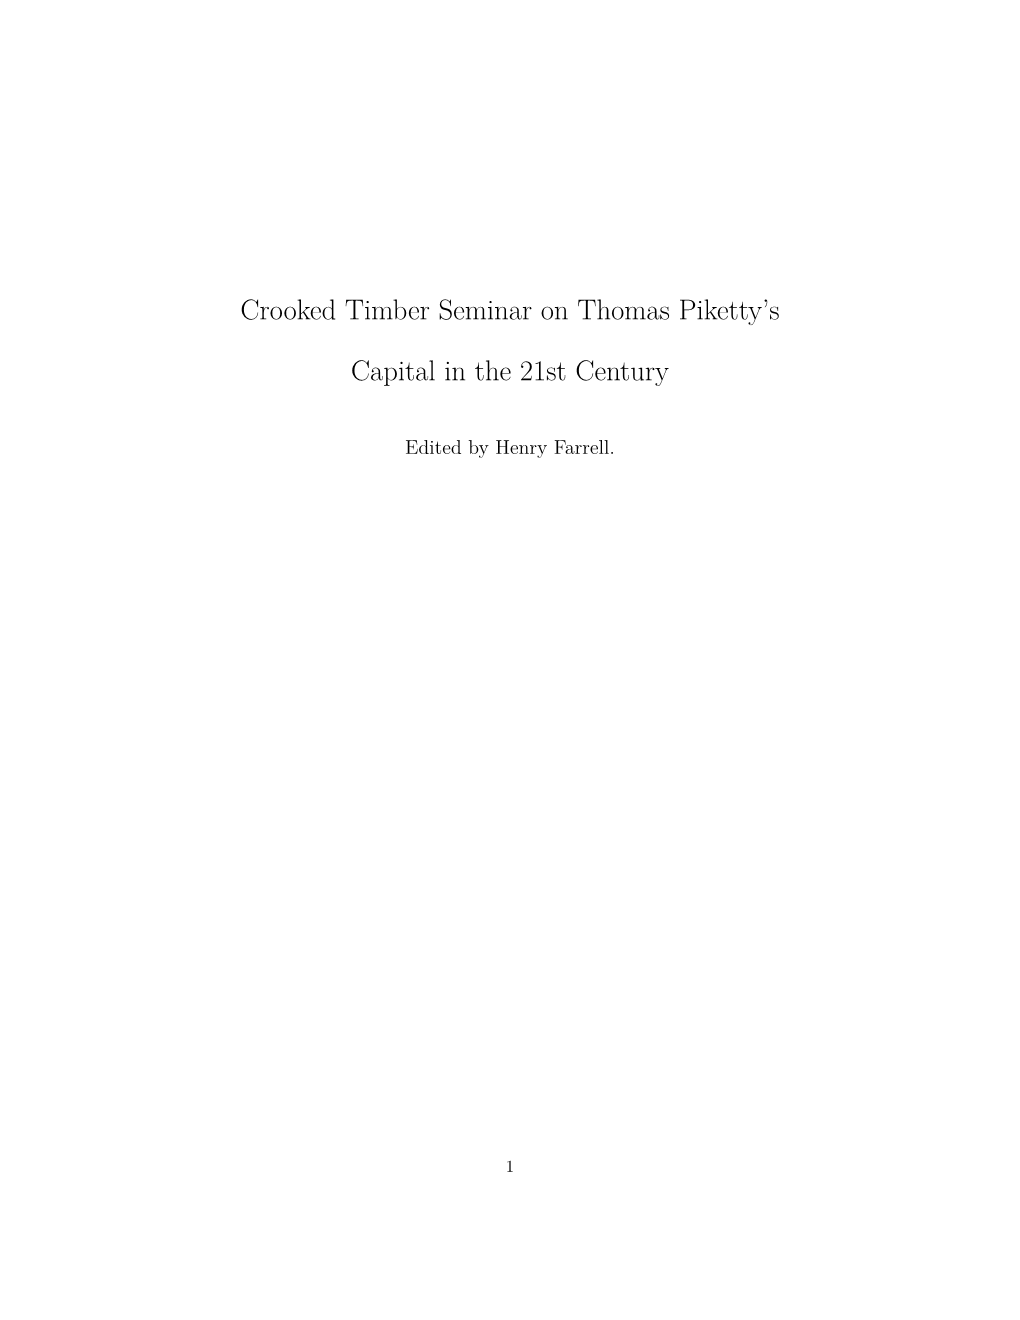 Crooked Timber Seminar on Thomas Piketty's Capital in the 21St Century